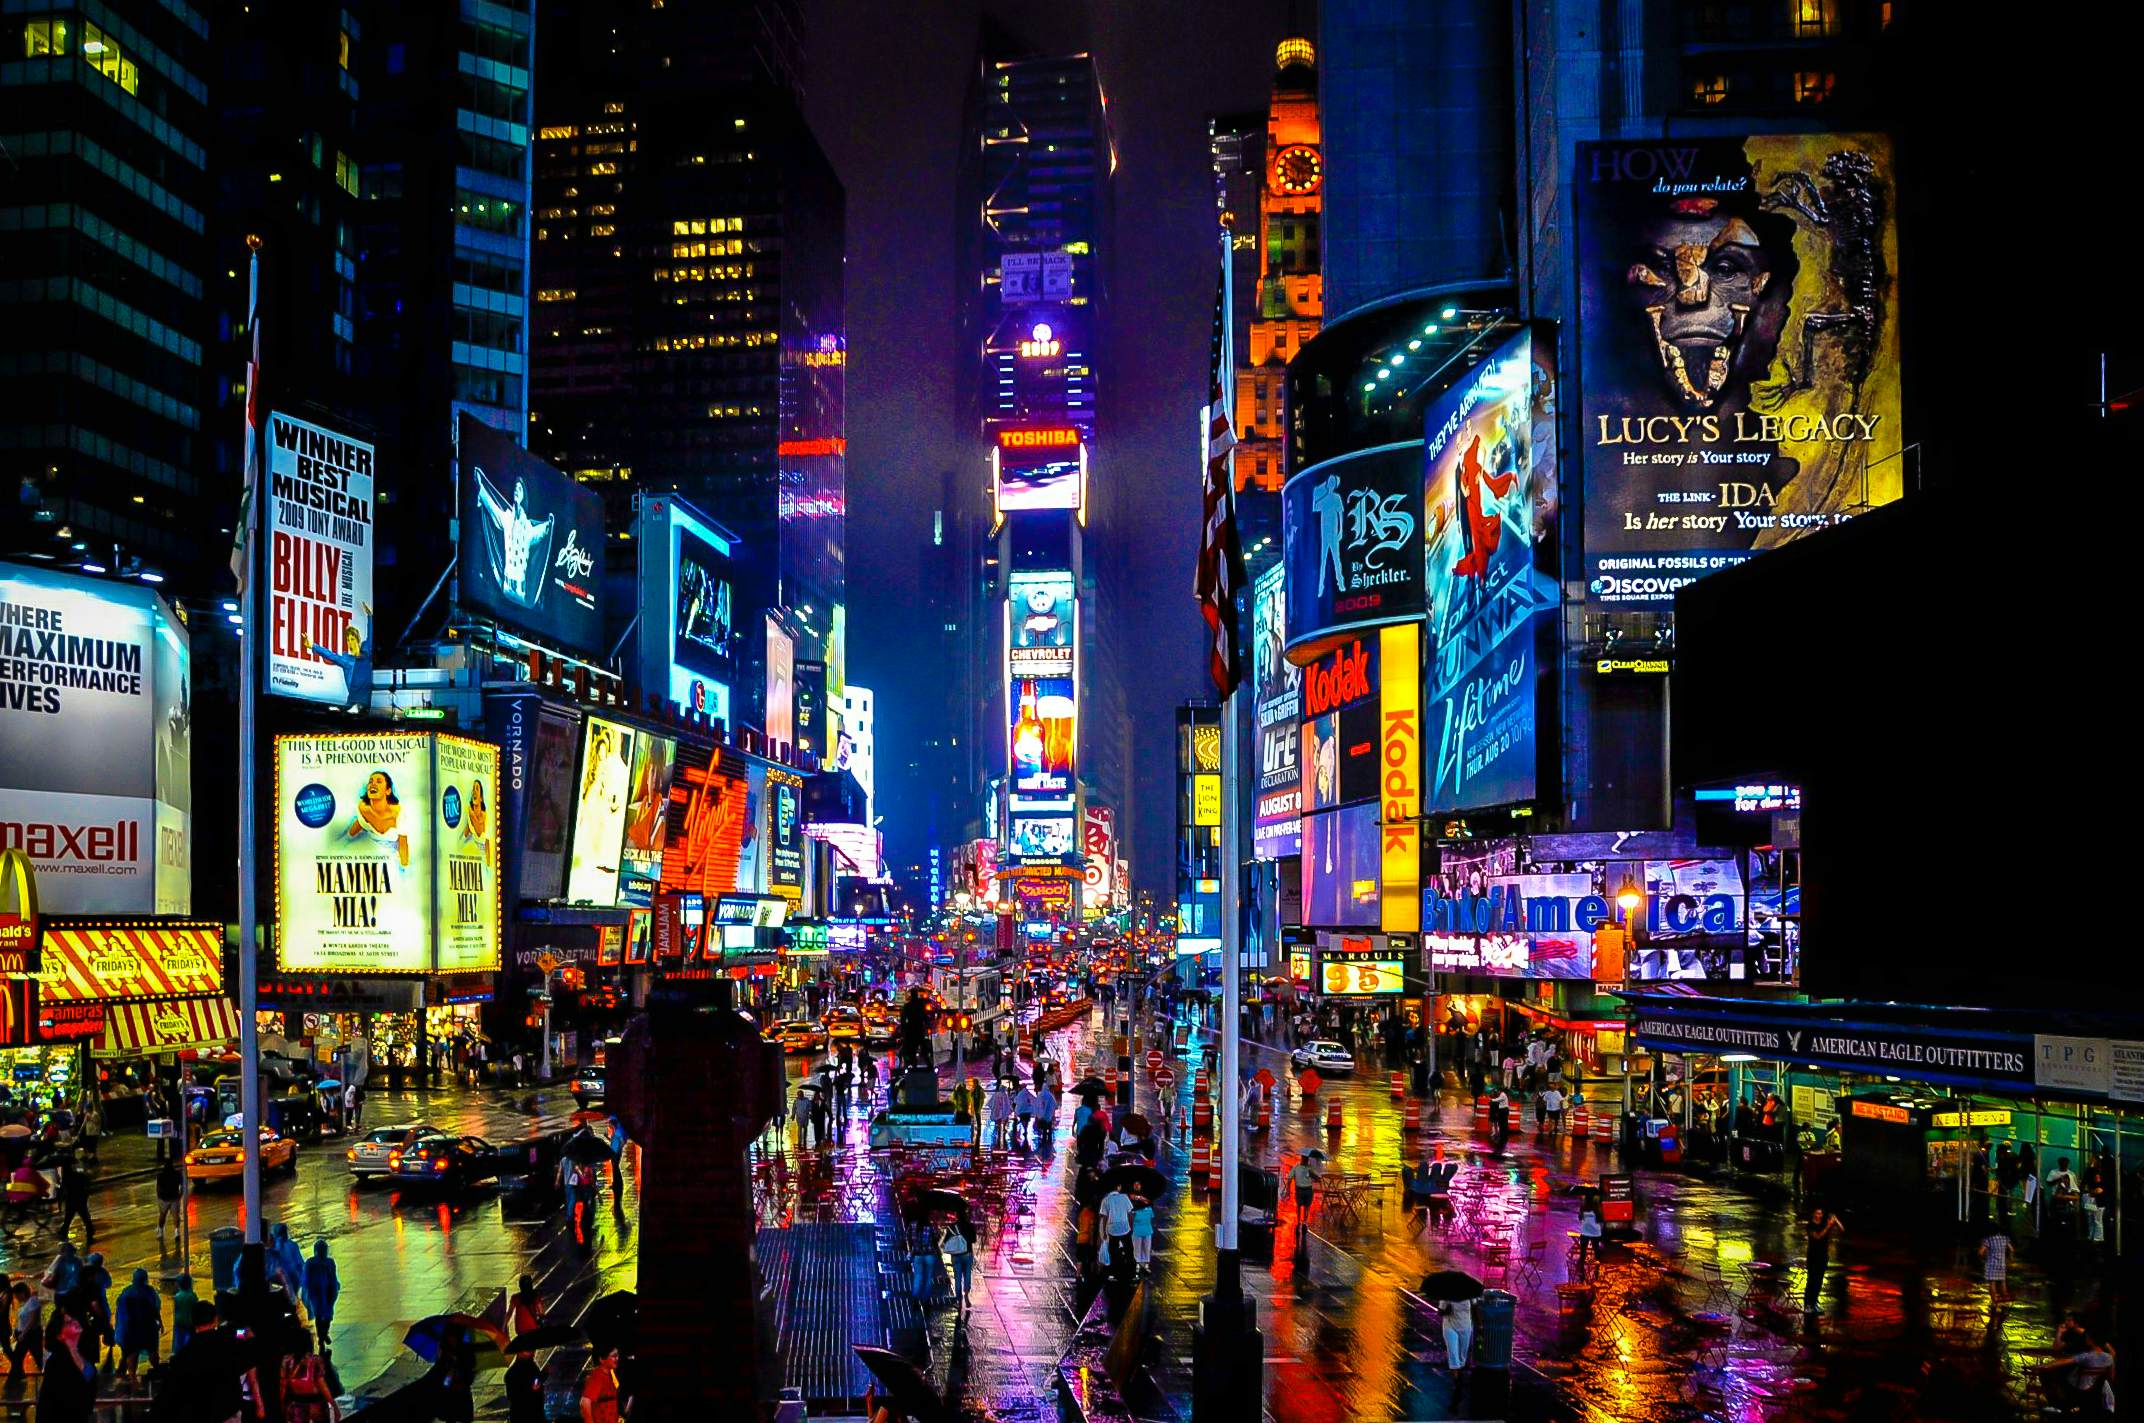 View from the street of Time Square at night 